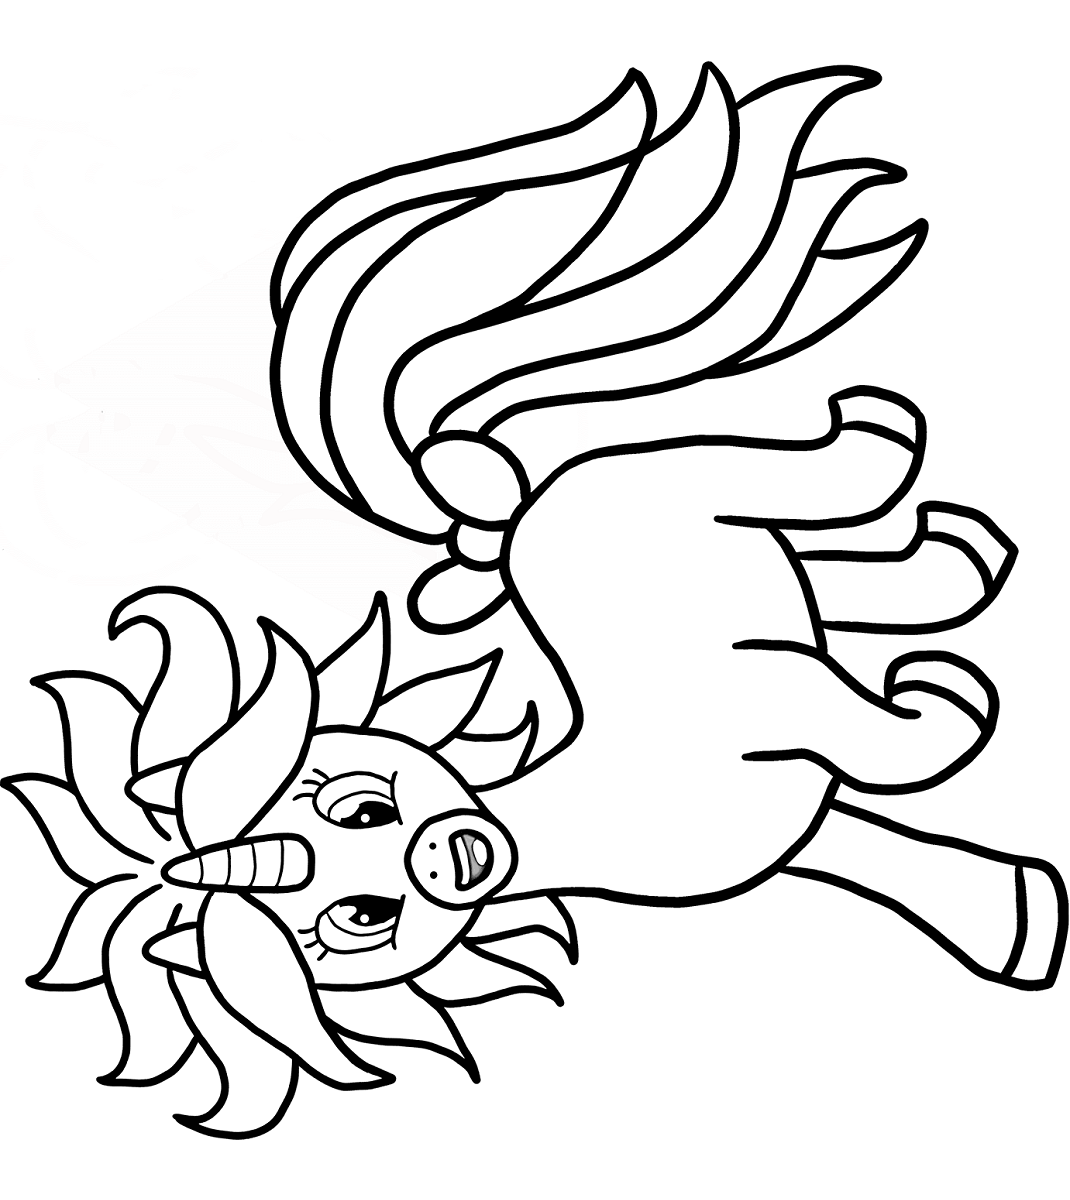 Hyperactive Unicorn Coloring Page